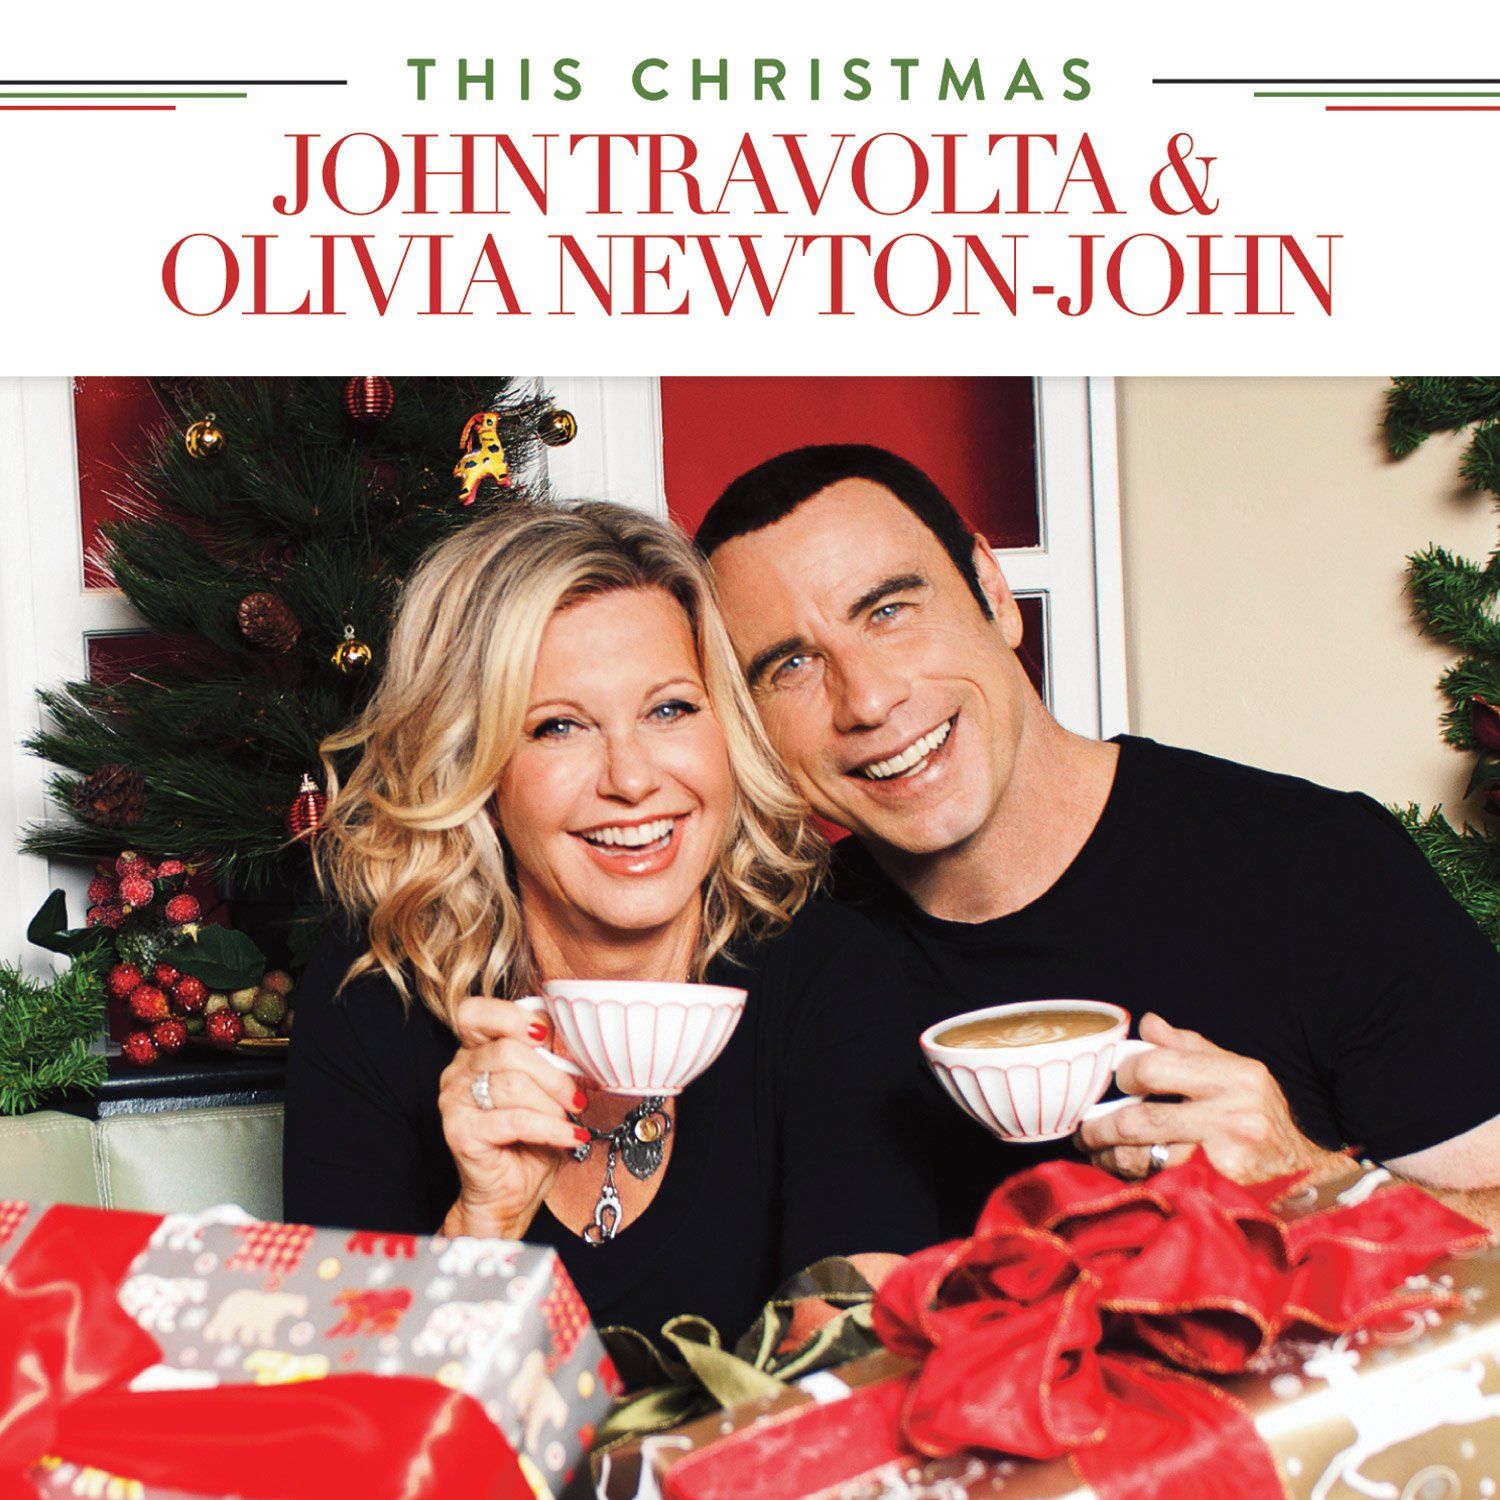 Front cover of This Christmas CD with Olivia Newton-John and John Travolta